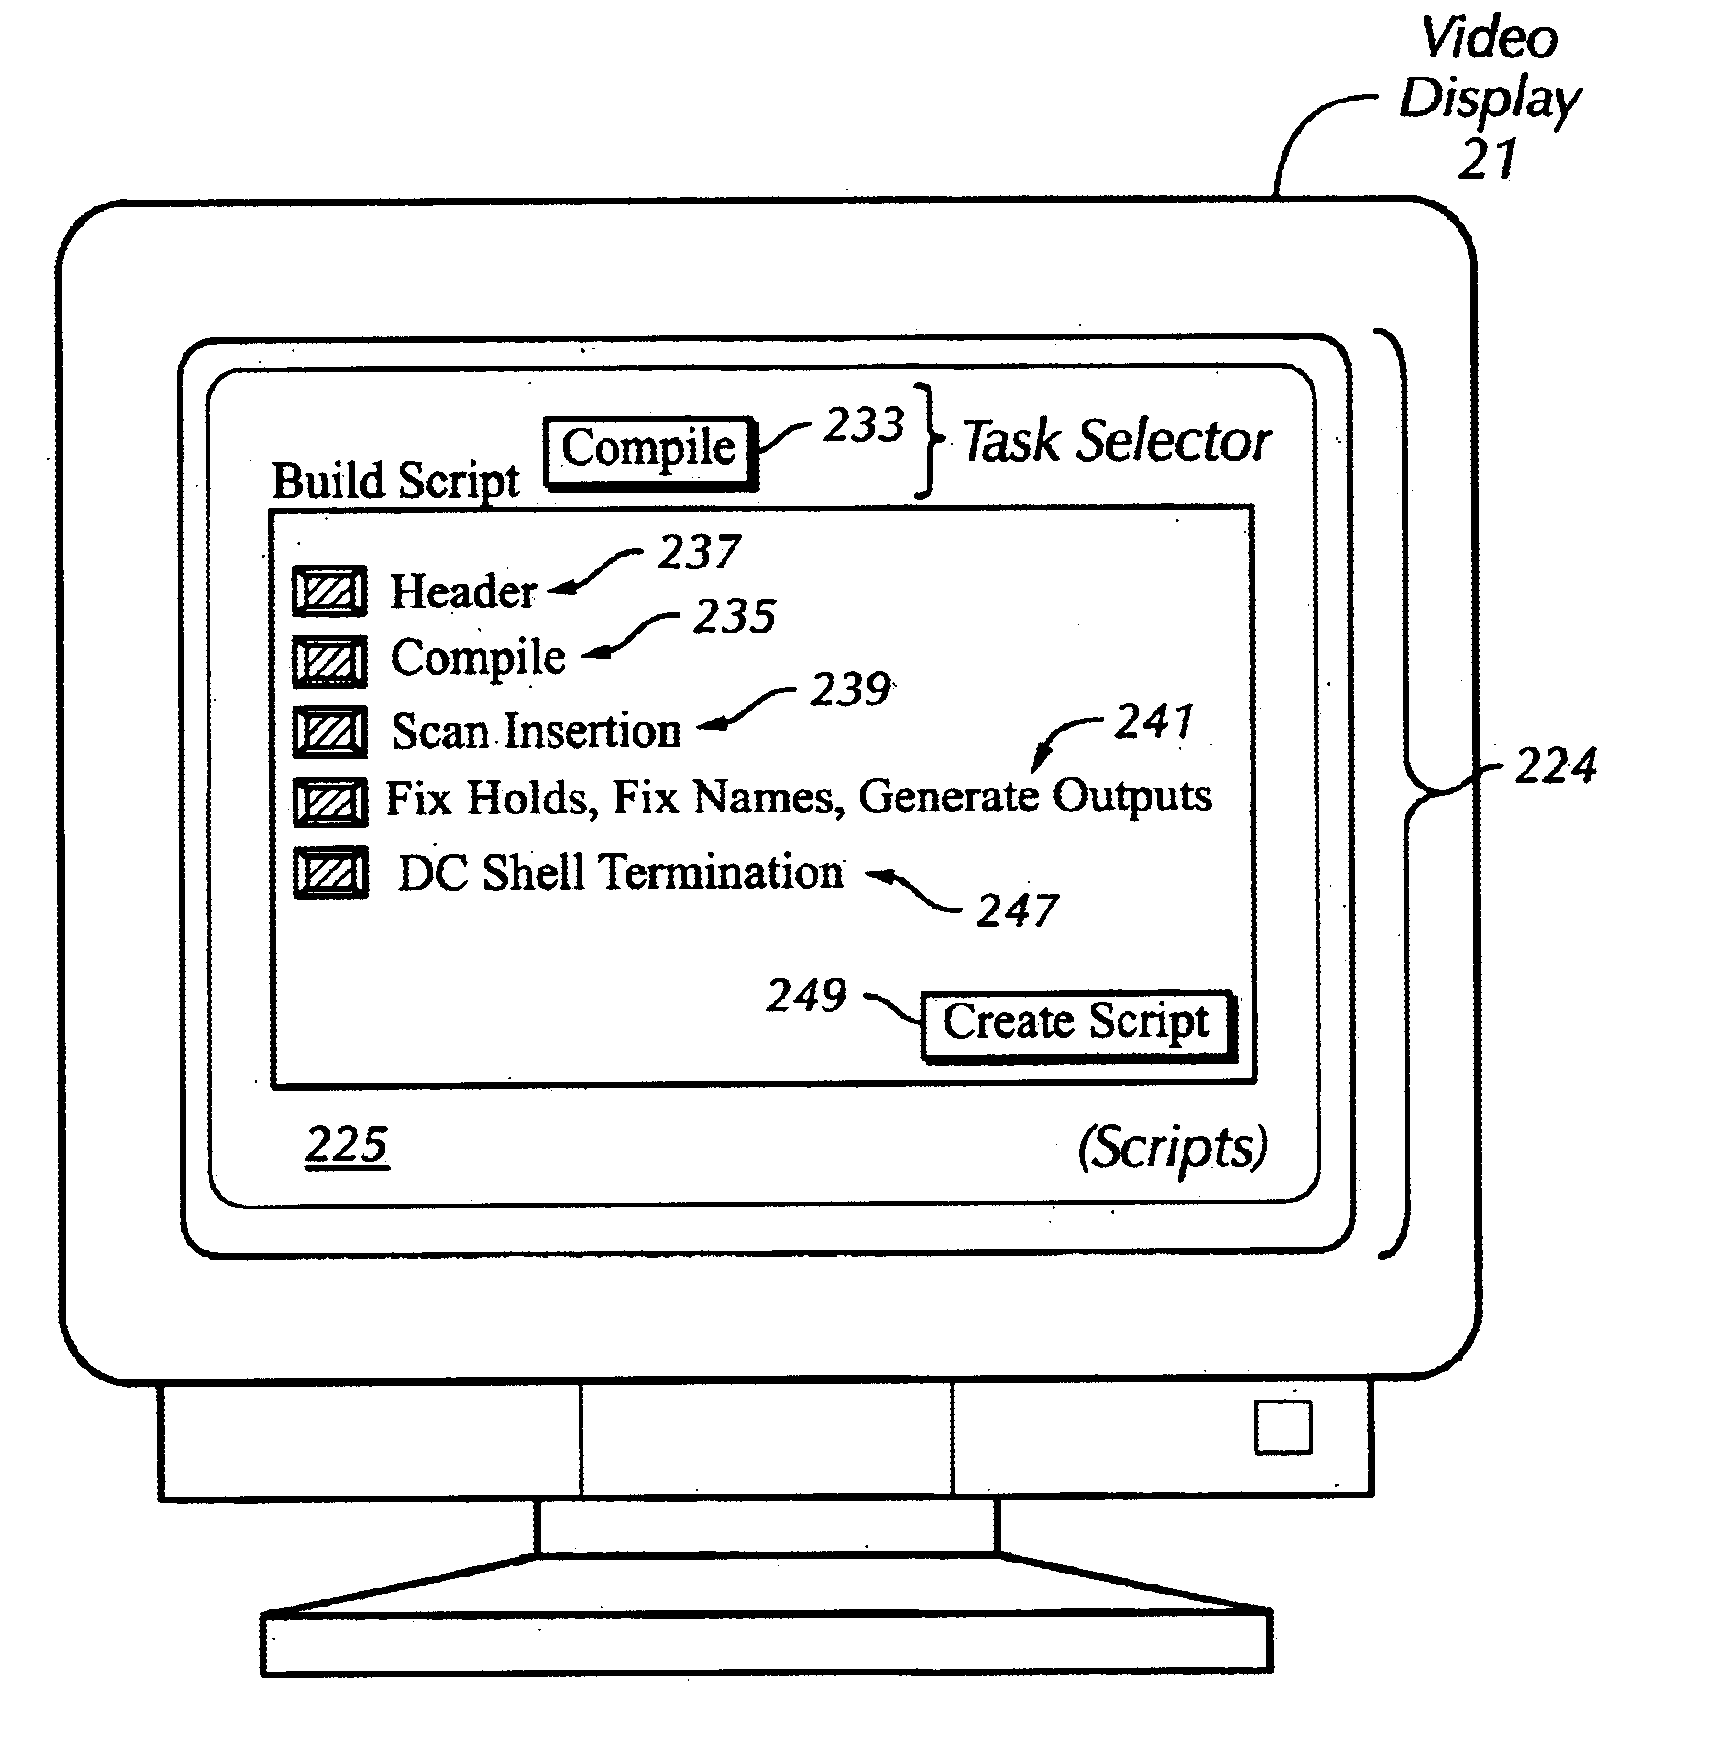 Methodology and graphical user interface for building logic synthesis command scripts using micro-templates